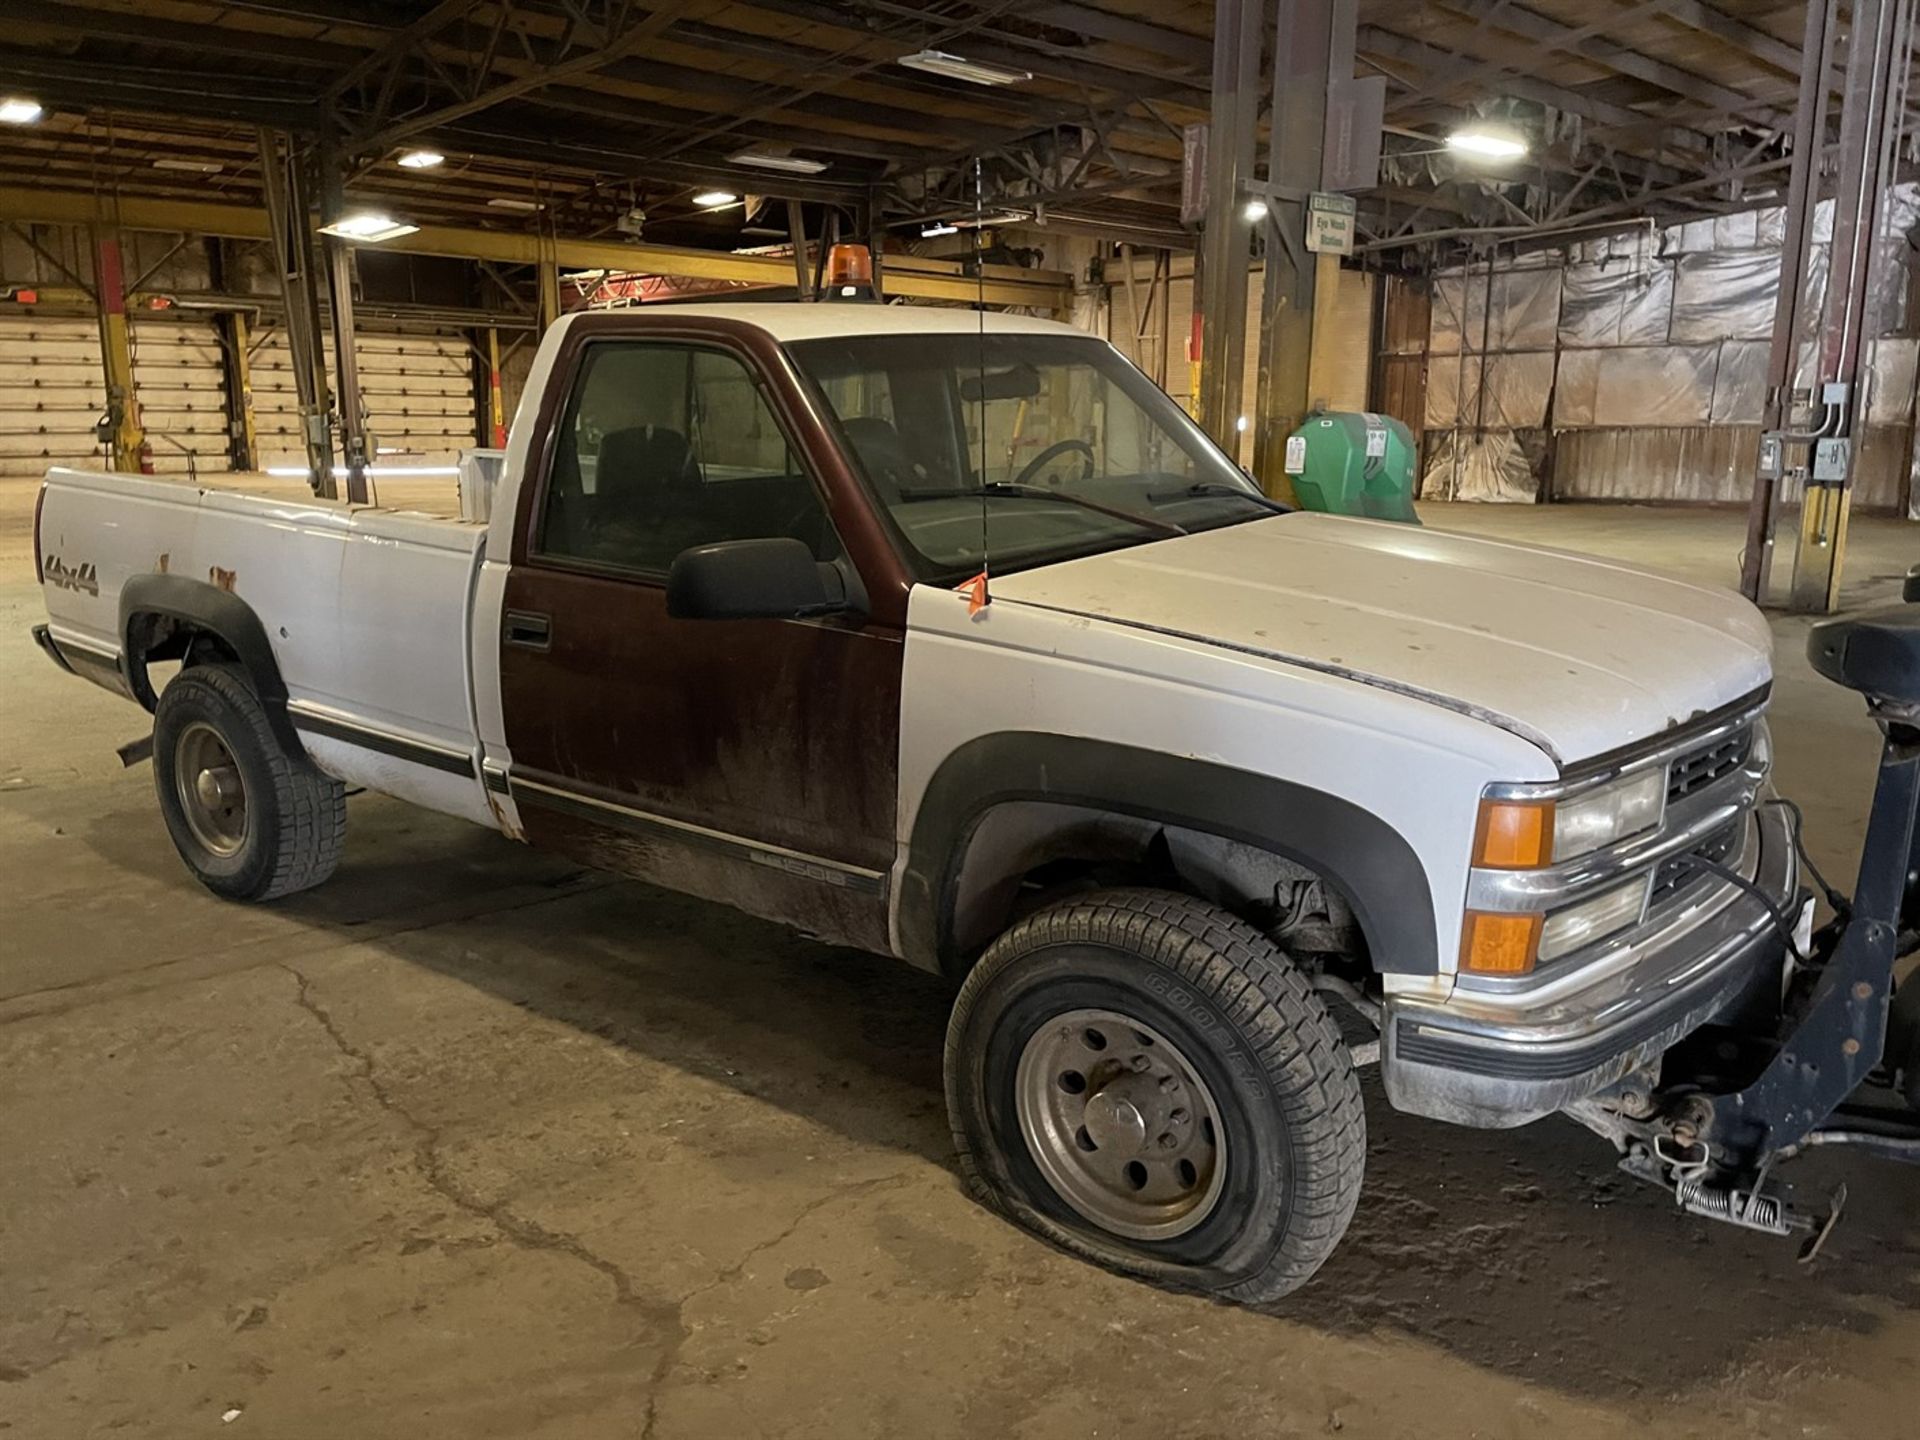 Chevy 2500 Pickup Truck, 4x4, Automatic, 183,638 Miles, Blizzard Plow, Needs Battery, Needs Fuel - Image 6 of 12